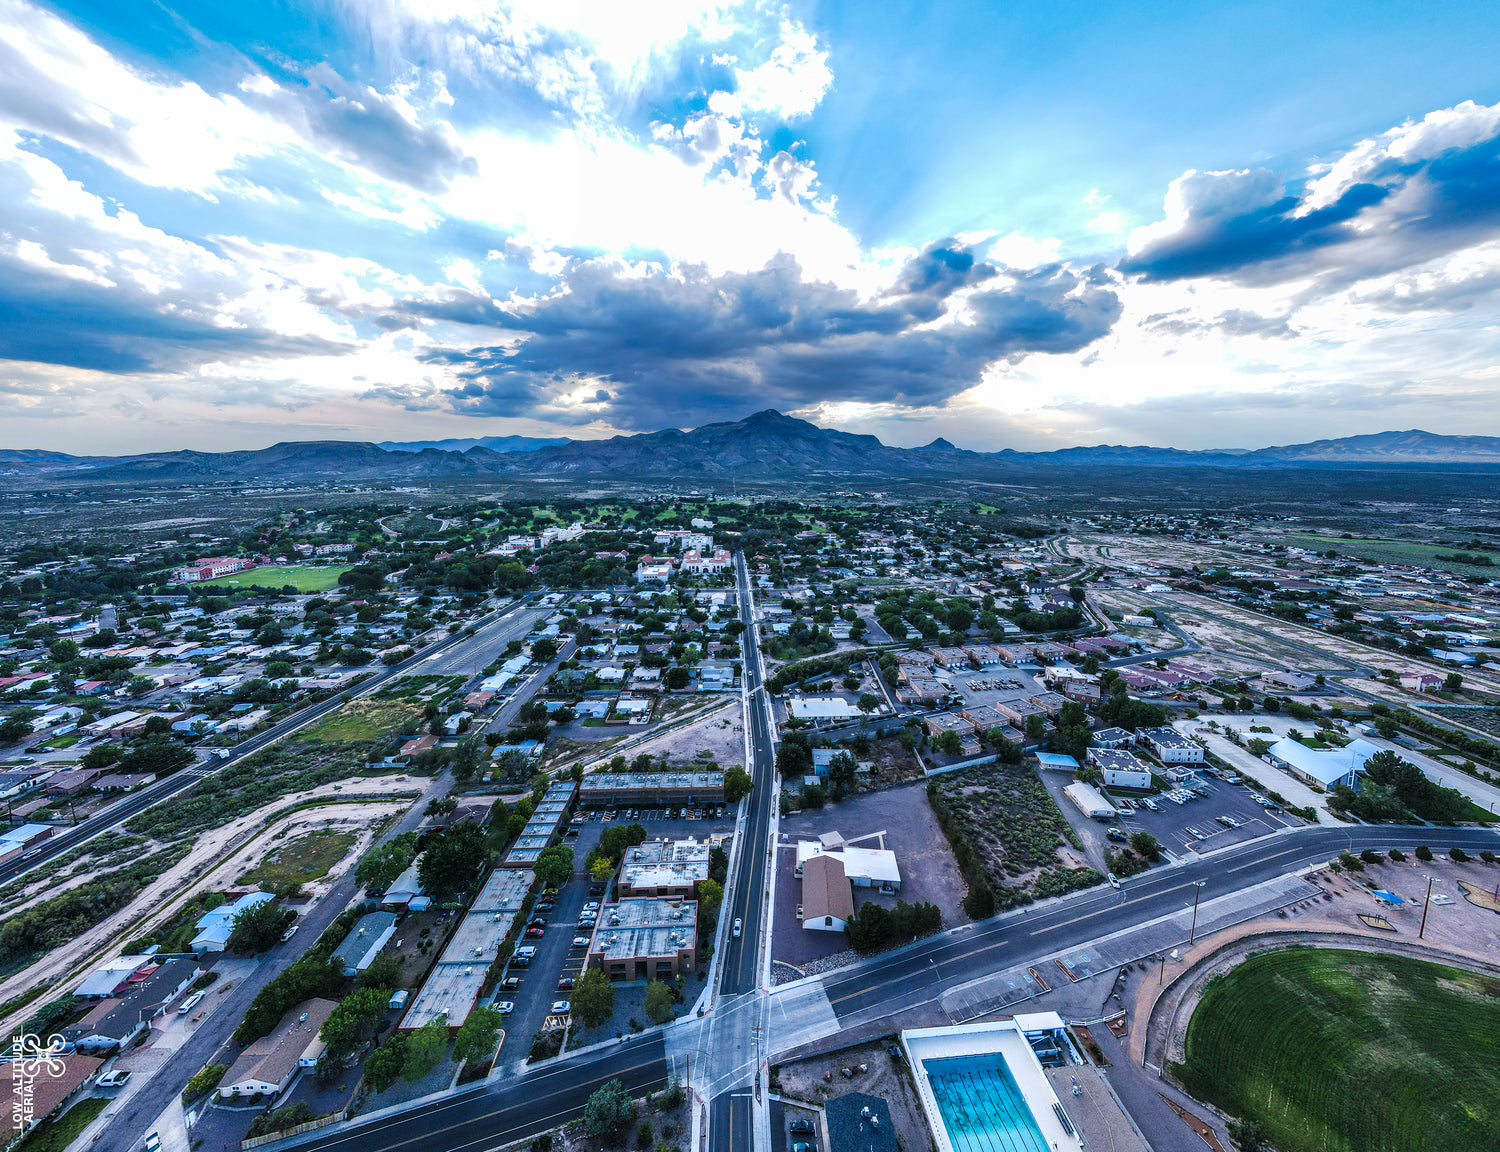 Panorama Photos by Low Altitude Aerial